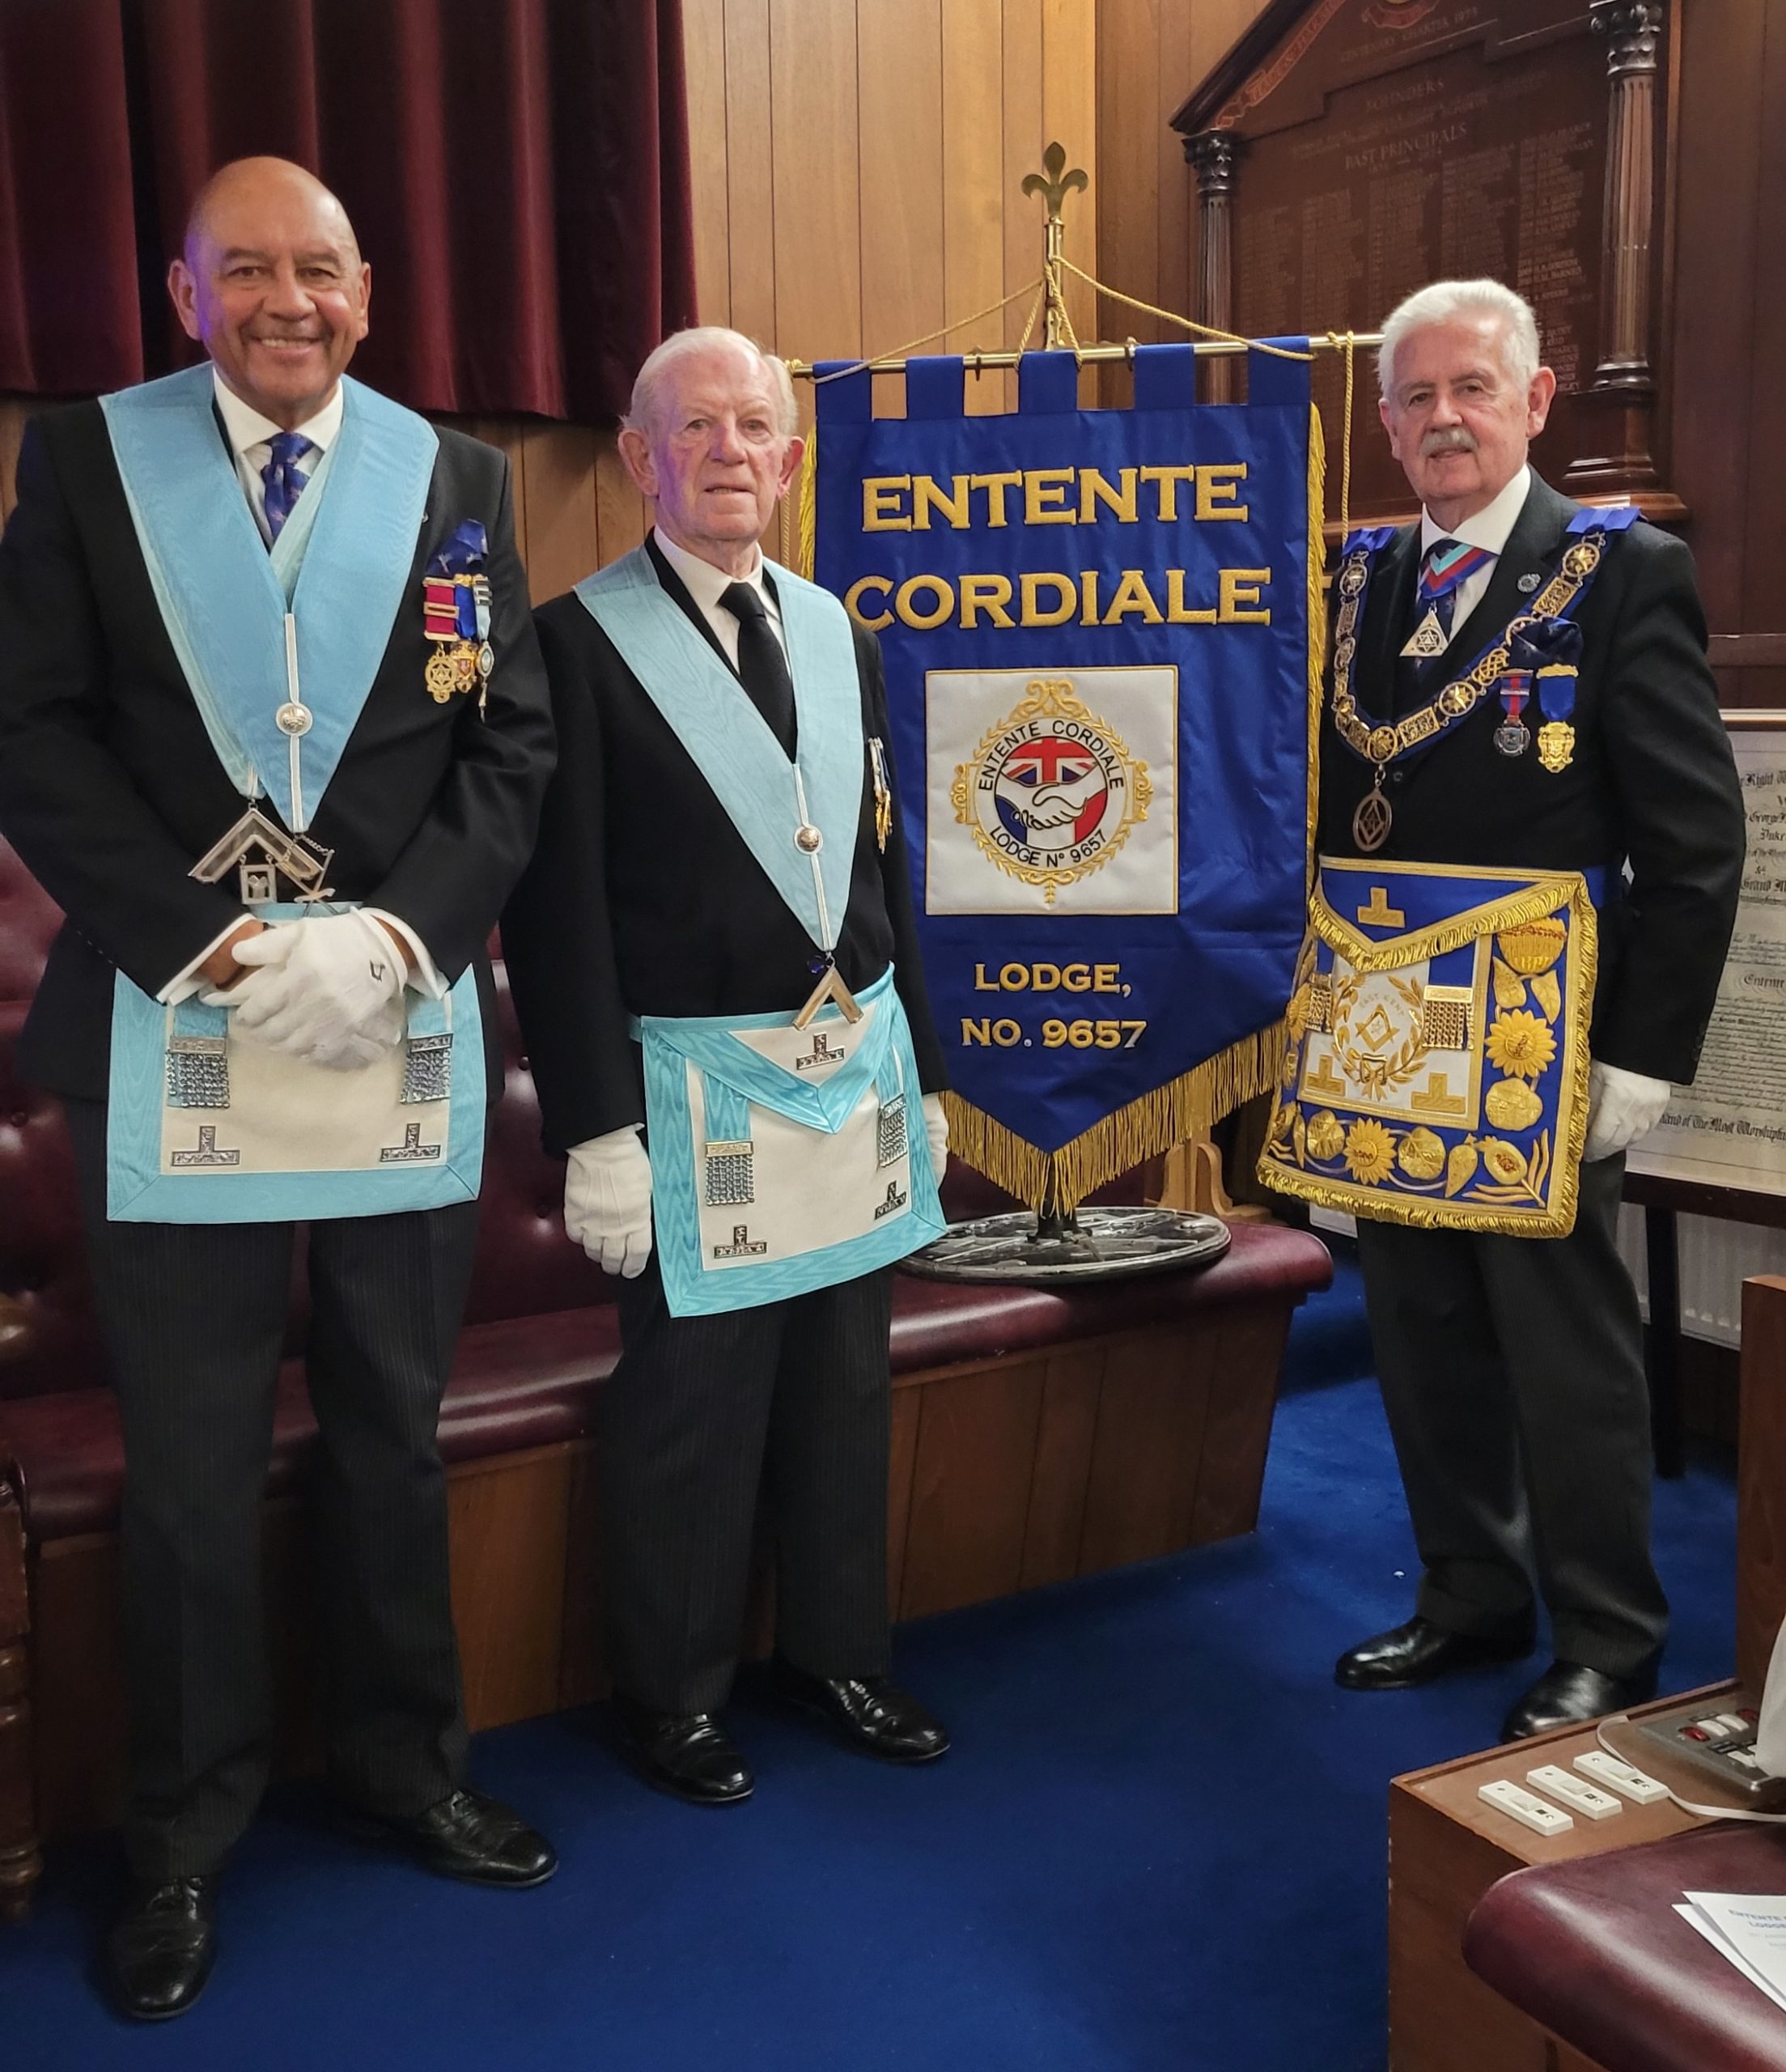 The PGM with the WM and David Pearson far left